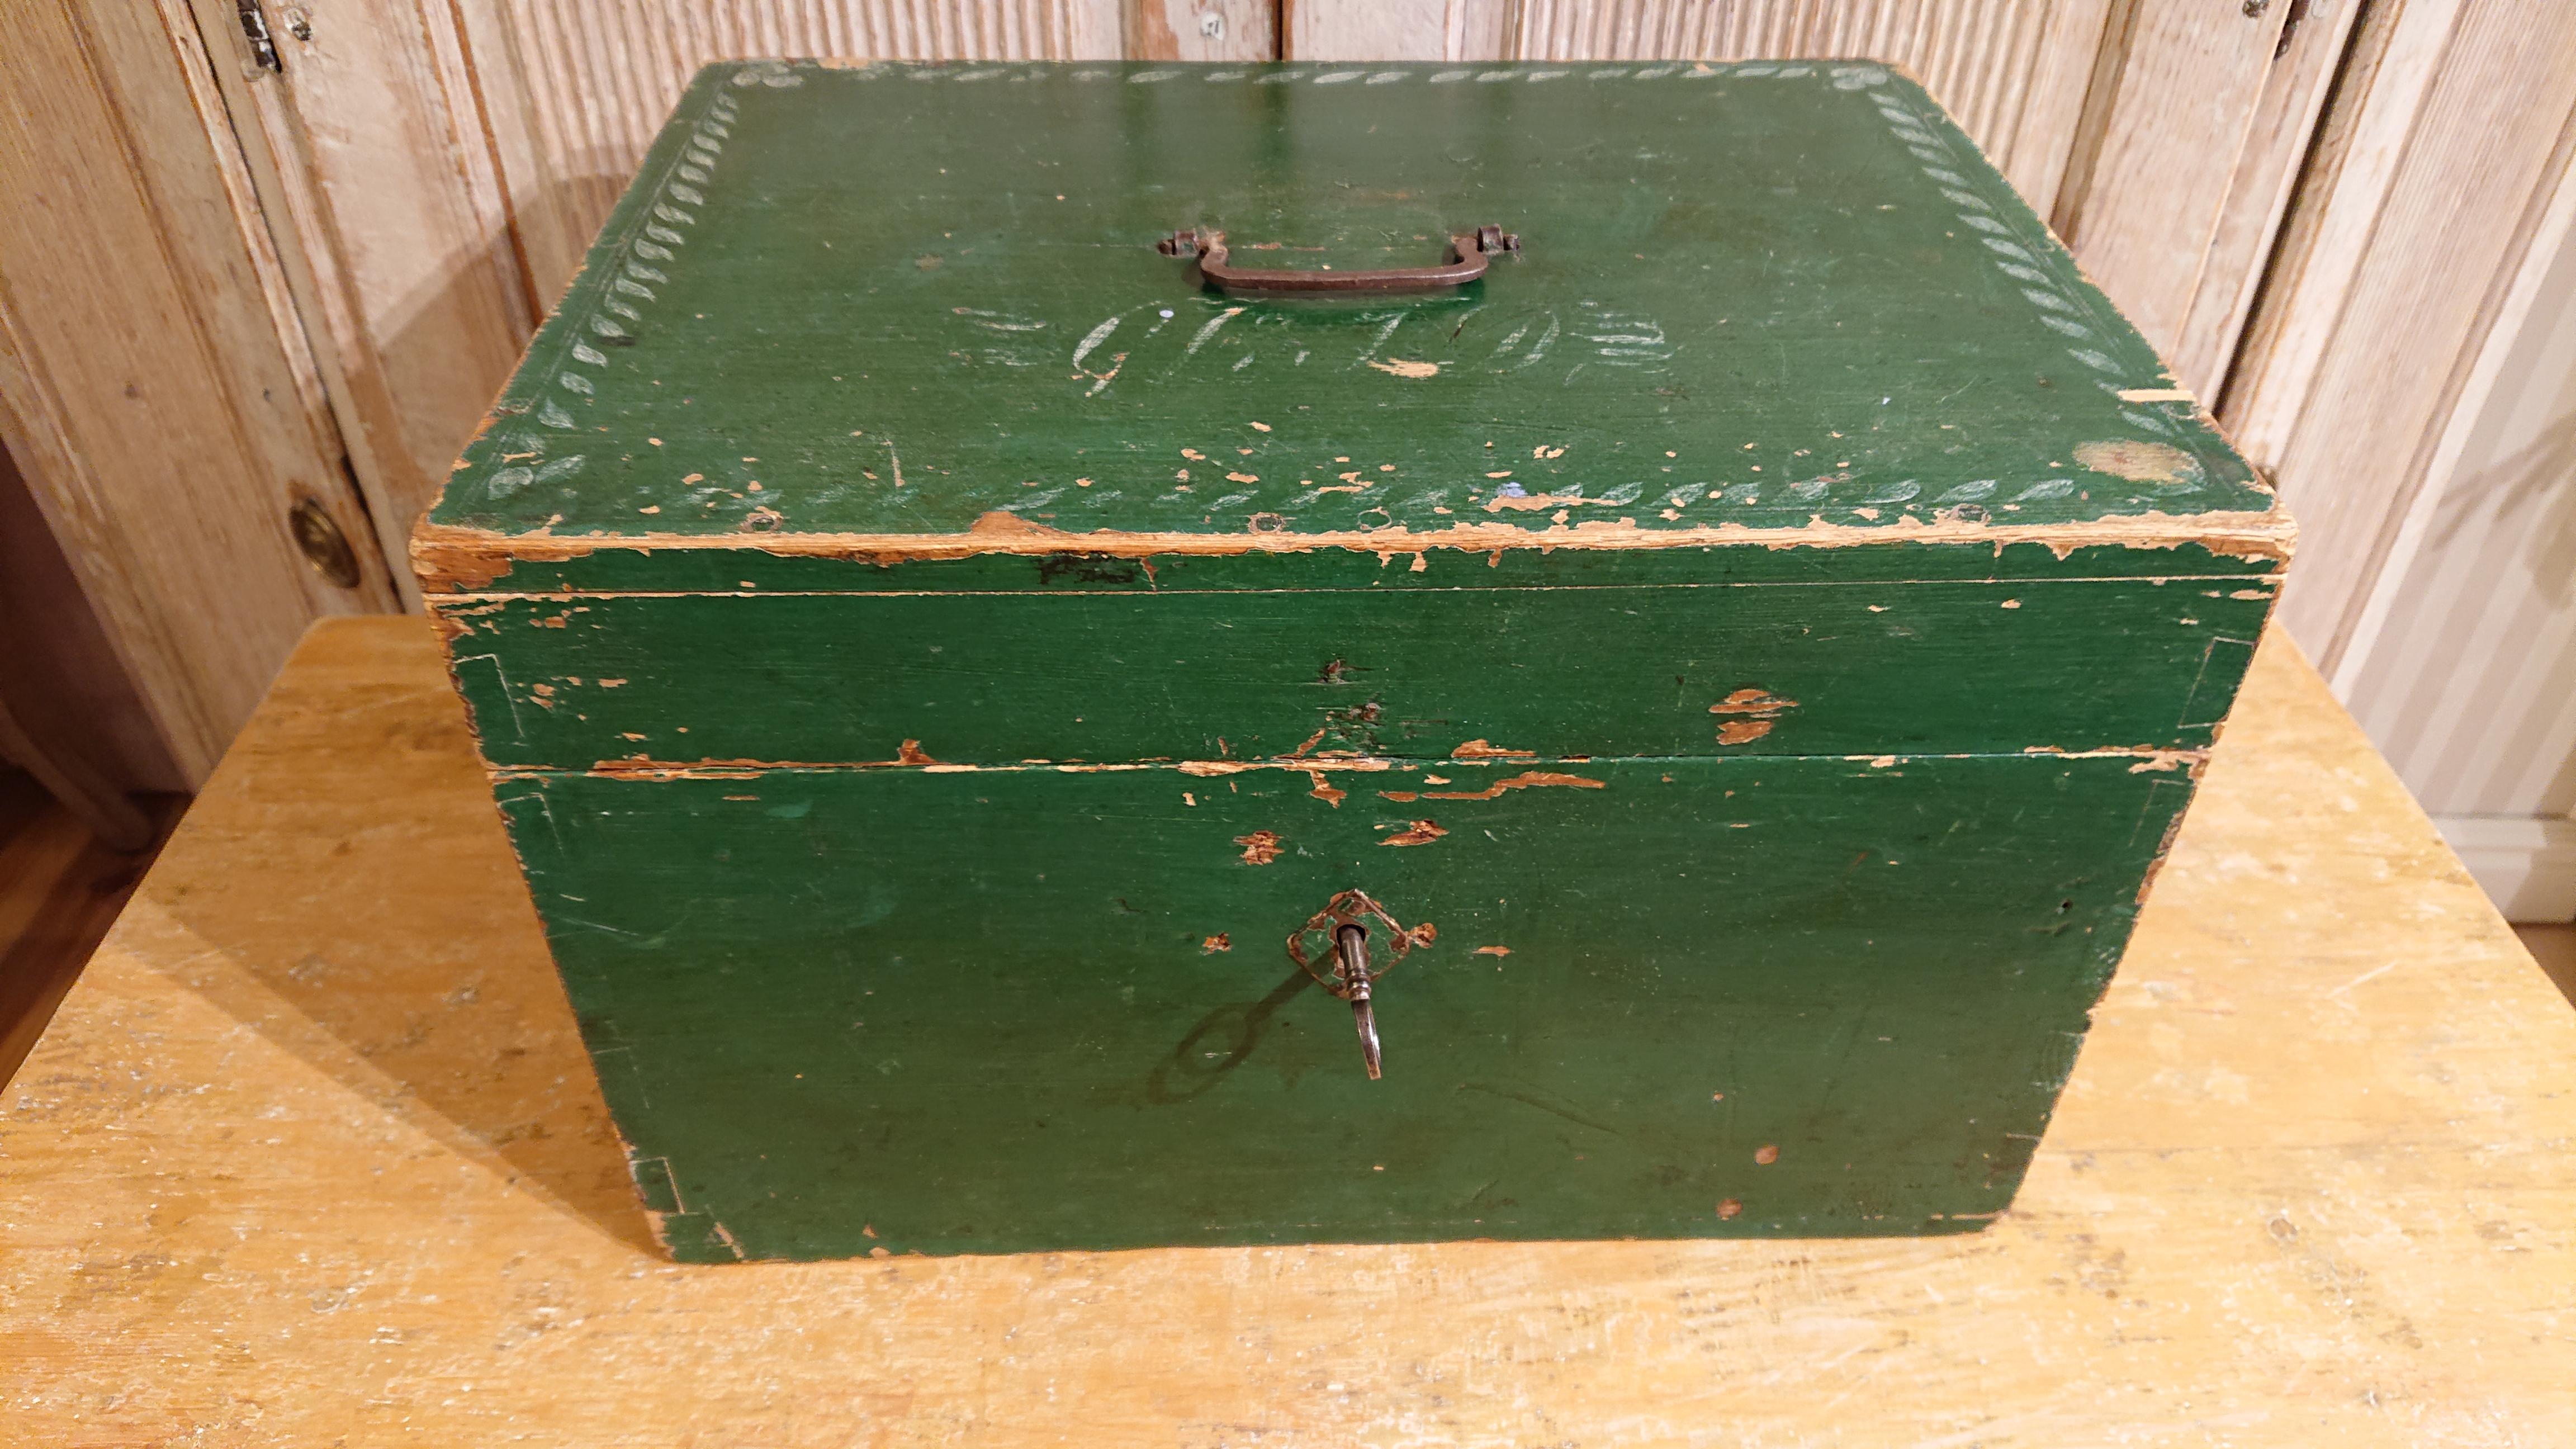 19th Century Swedish Chest / Box from Boden Norrbotten, Northern Sweden.
A beautiful box with untouched original painting.
On the lid it is painted with leaf loops and initials BJD where D stands for daughter, which means that it is owned by a